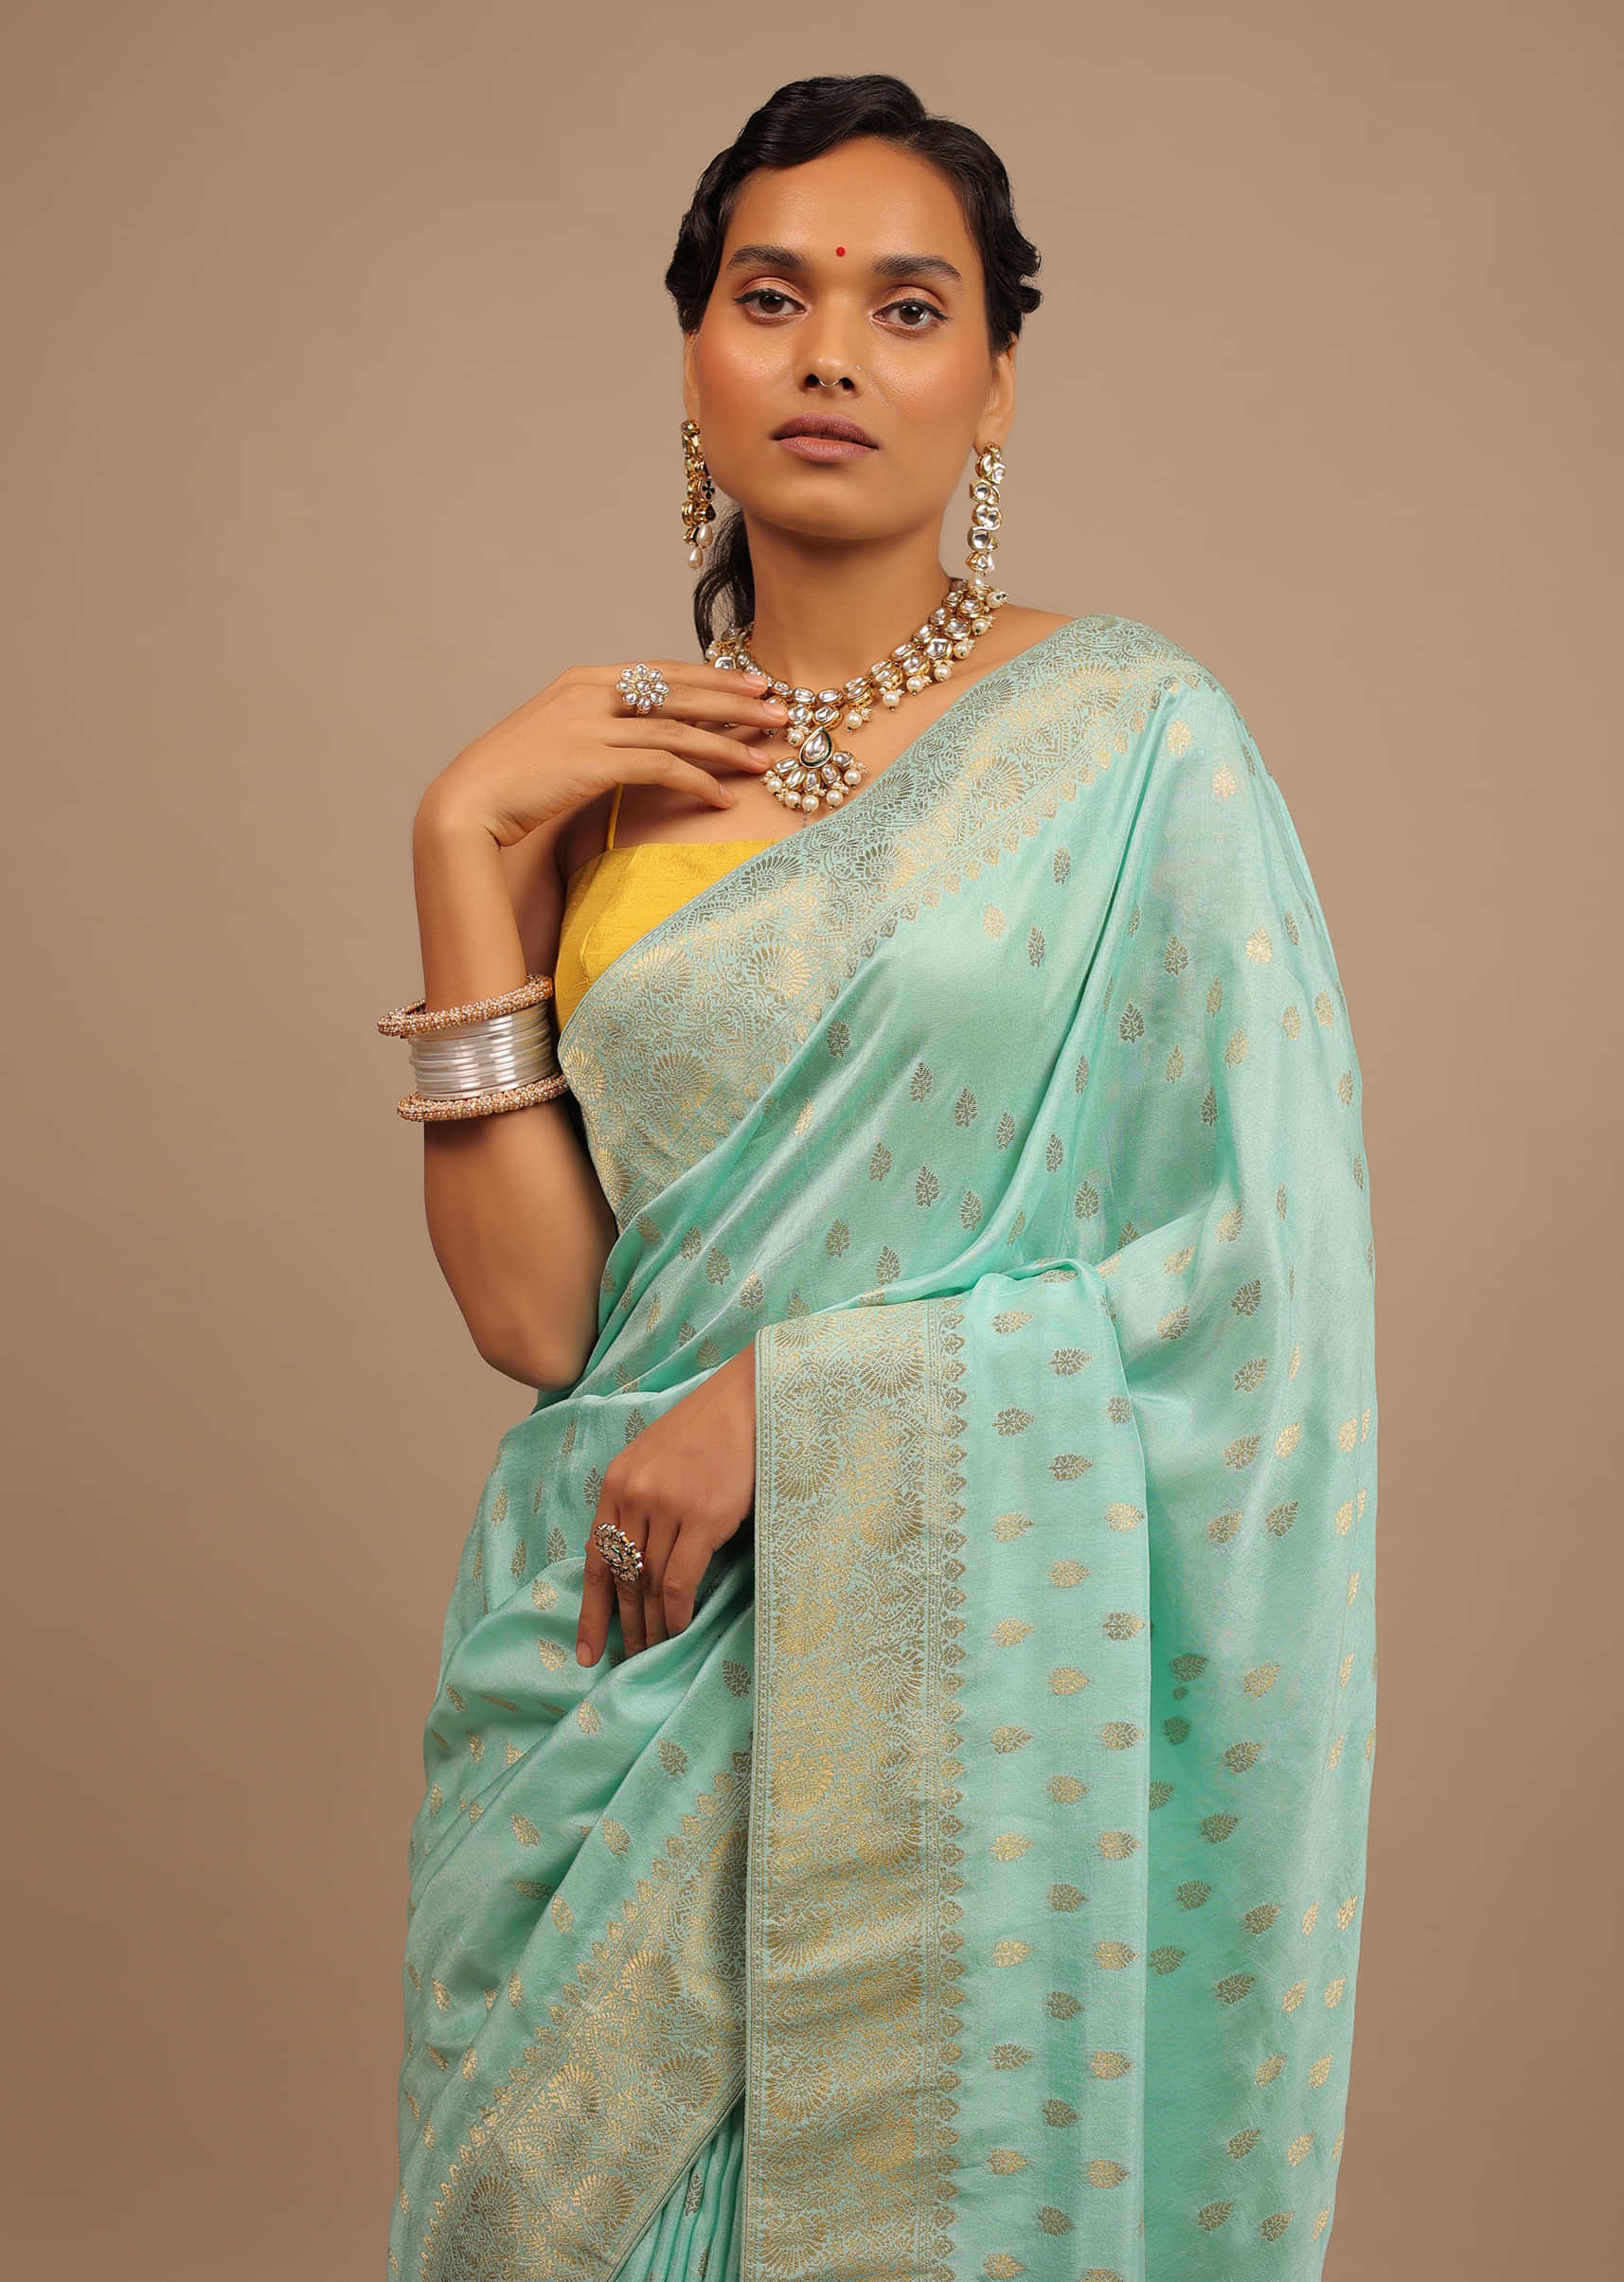 Sky Blue Saree In Dola Silk With Woven Leaf Buttis And Moroccan Weave On Pallu